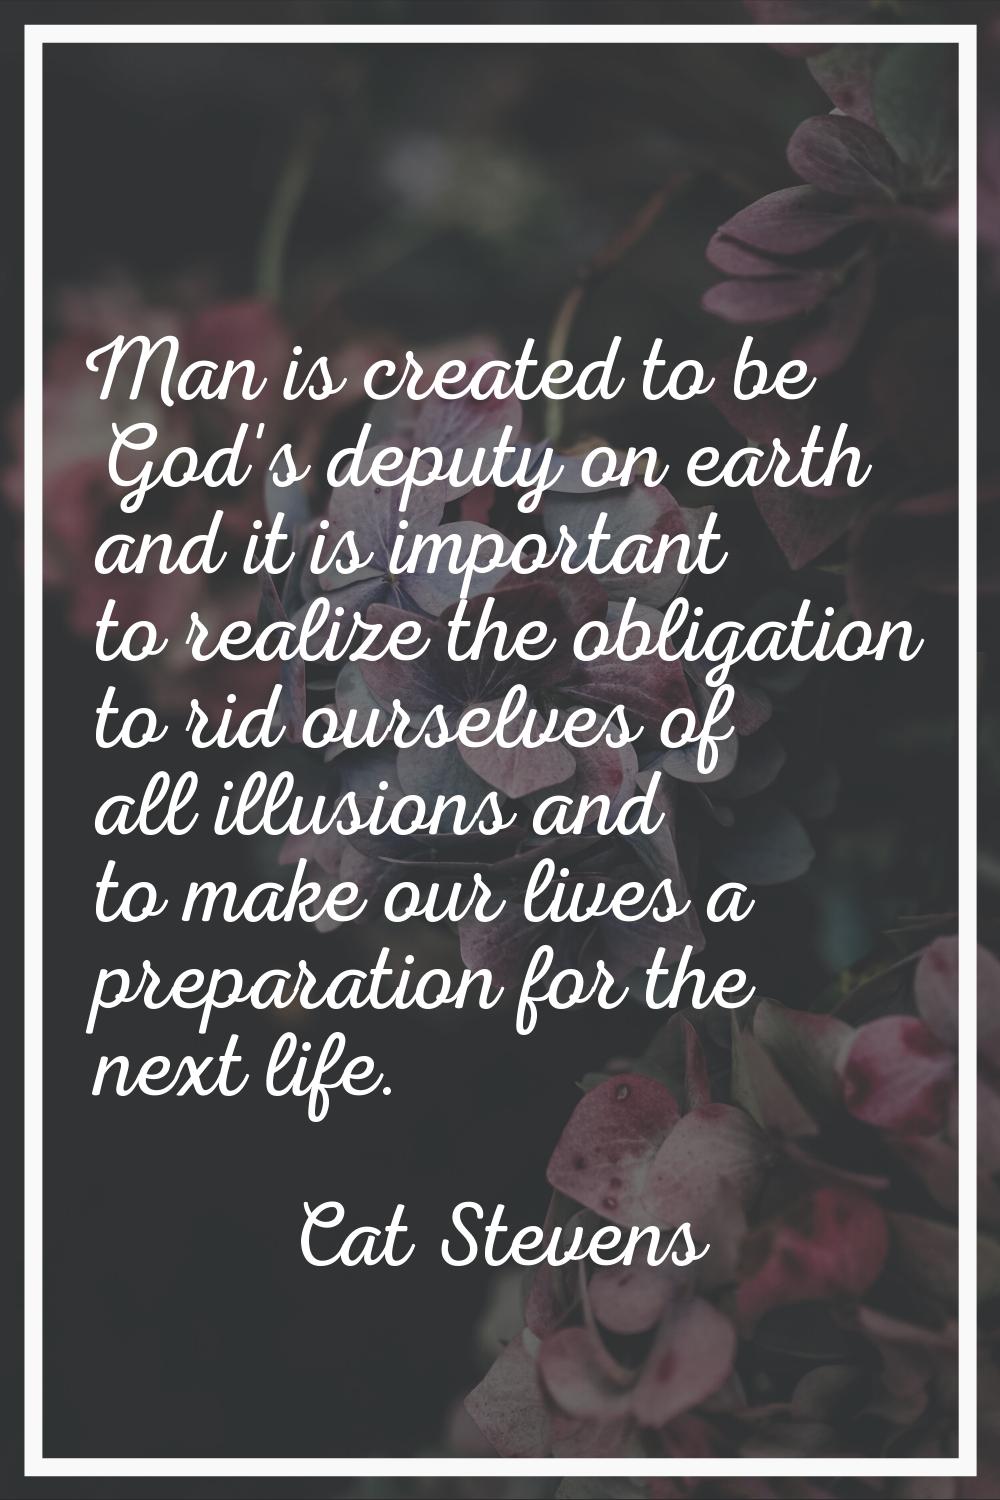 Man is created to be God's deputy on earth and it is important to realize the obligation to rid our